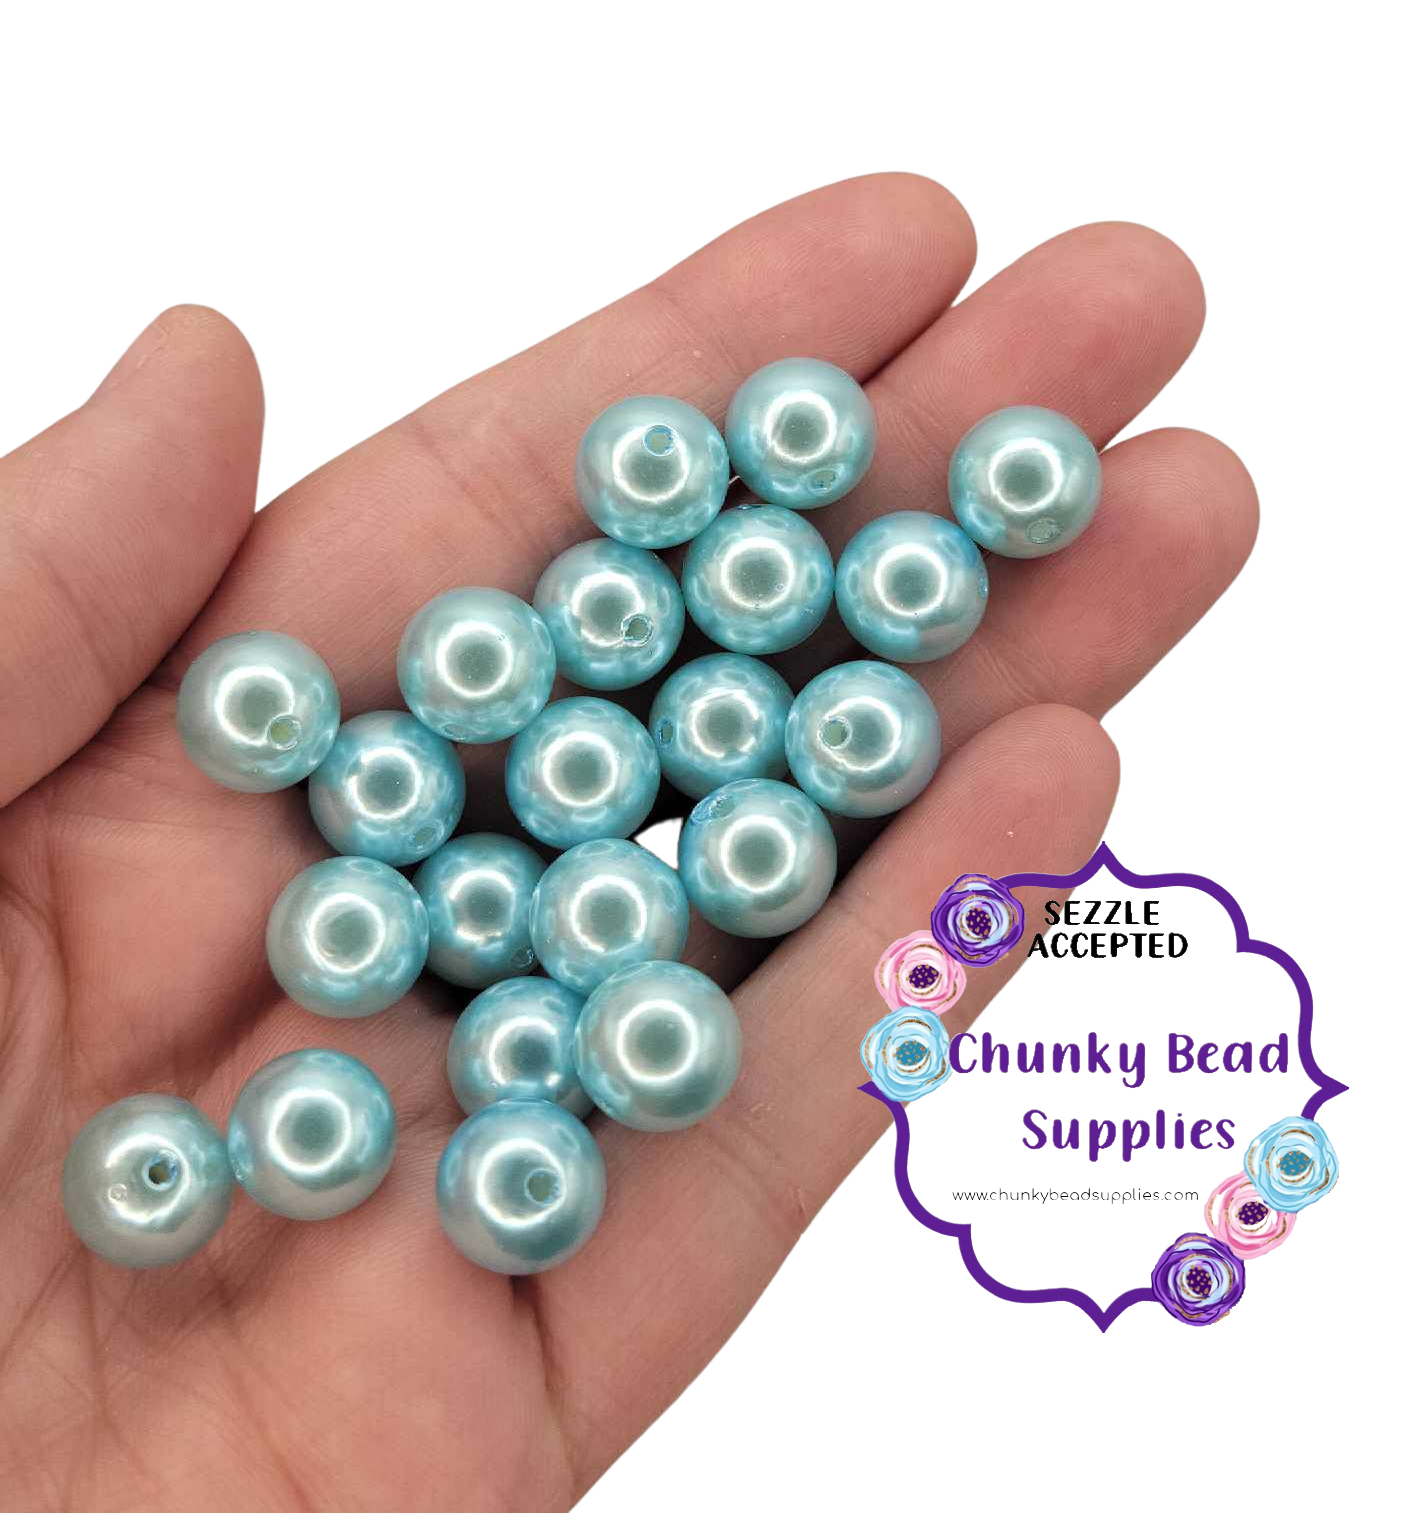 12mm “Country Blue" Acrylic Pearl Beads